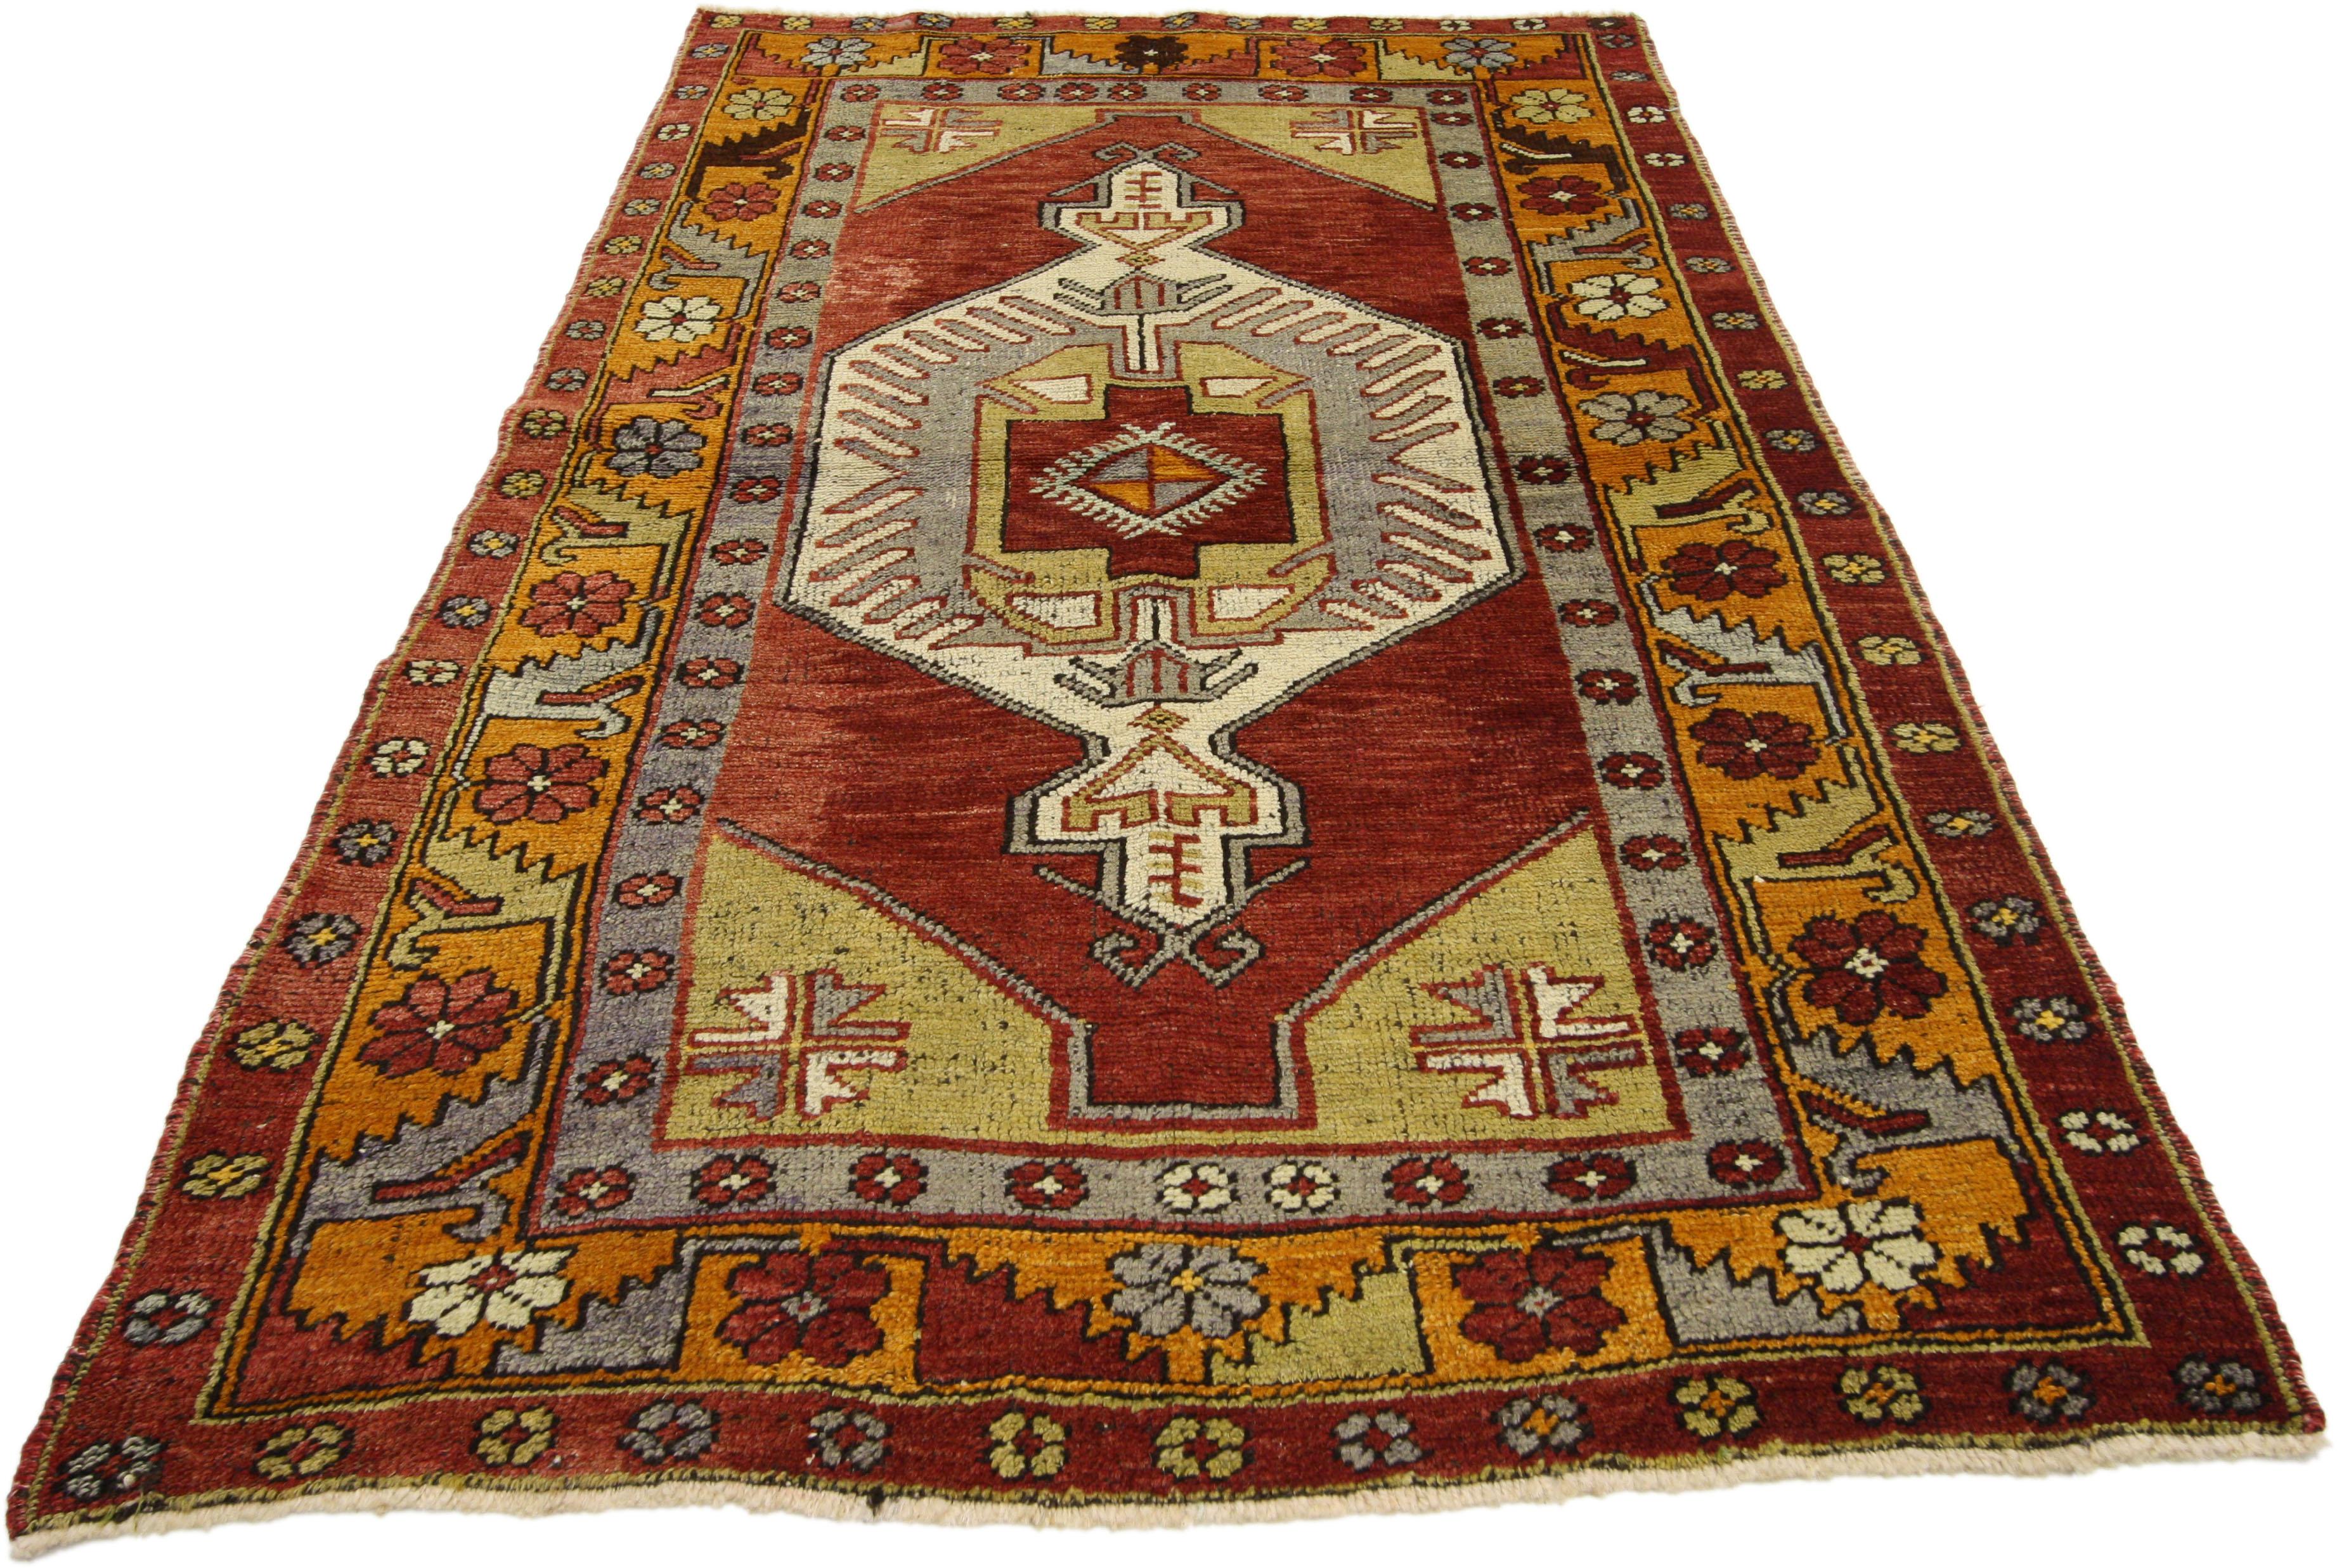 50074, vintage Turkish Oushak Accent rug, entry or foyer rug. This vintage Turkish Oushak rug features a modern traditional style. Immersed in Anatolian history and refined colors, this vintage Oushak rug combines simplicity with sophistication.